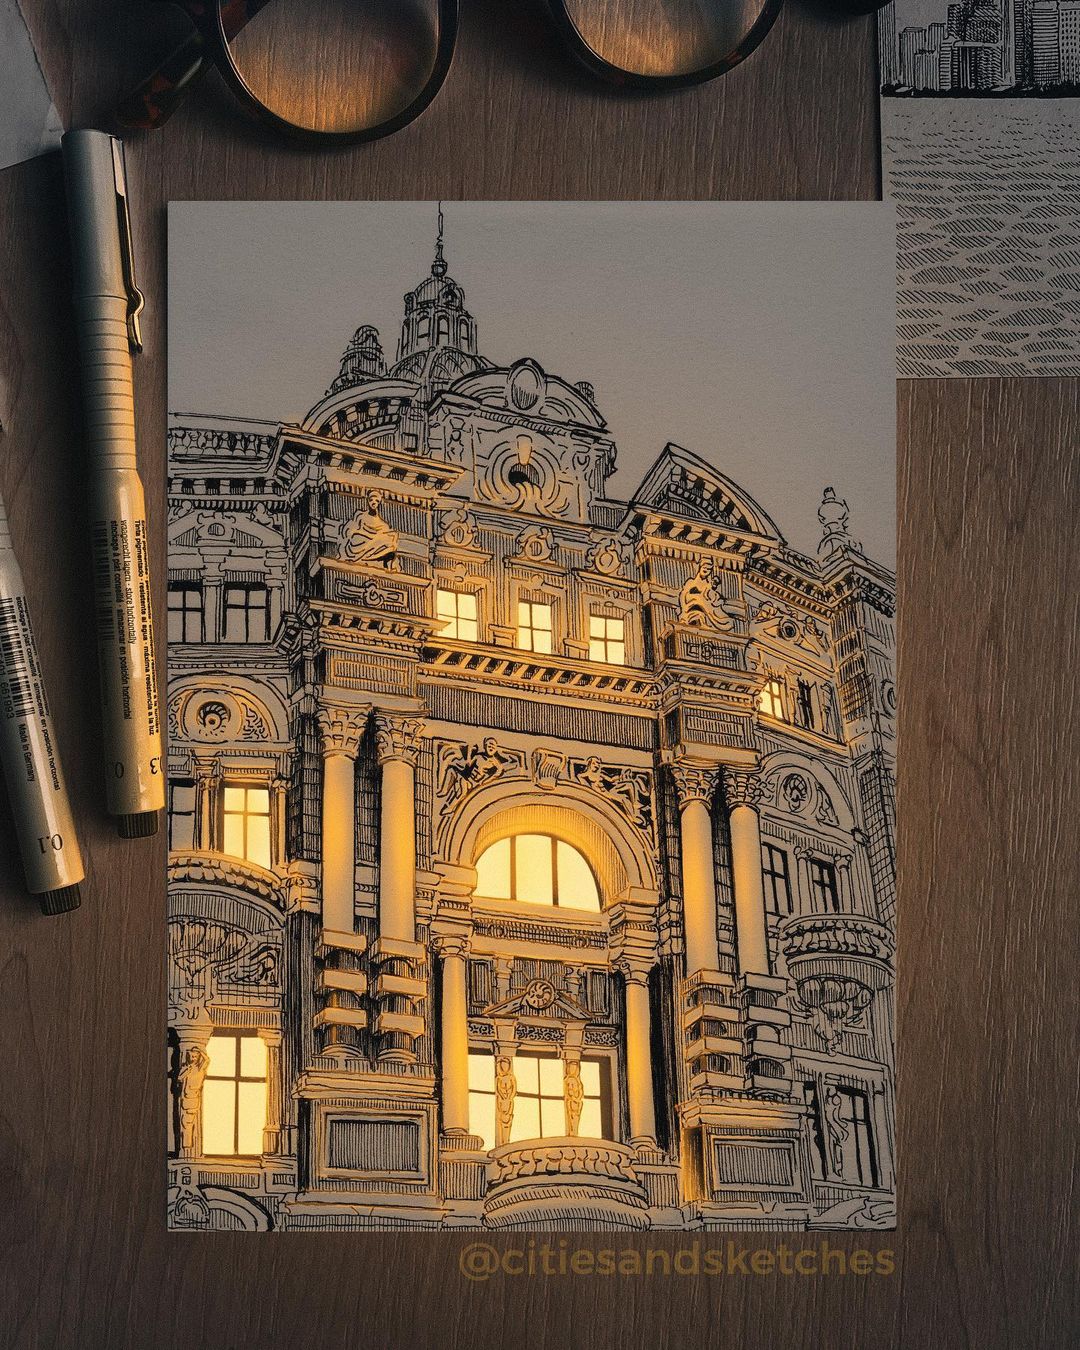 Glowing Archisketch: gorgeously illuminated architectural sketches by Nikita Busyak